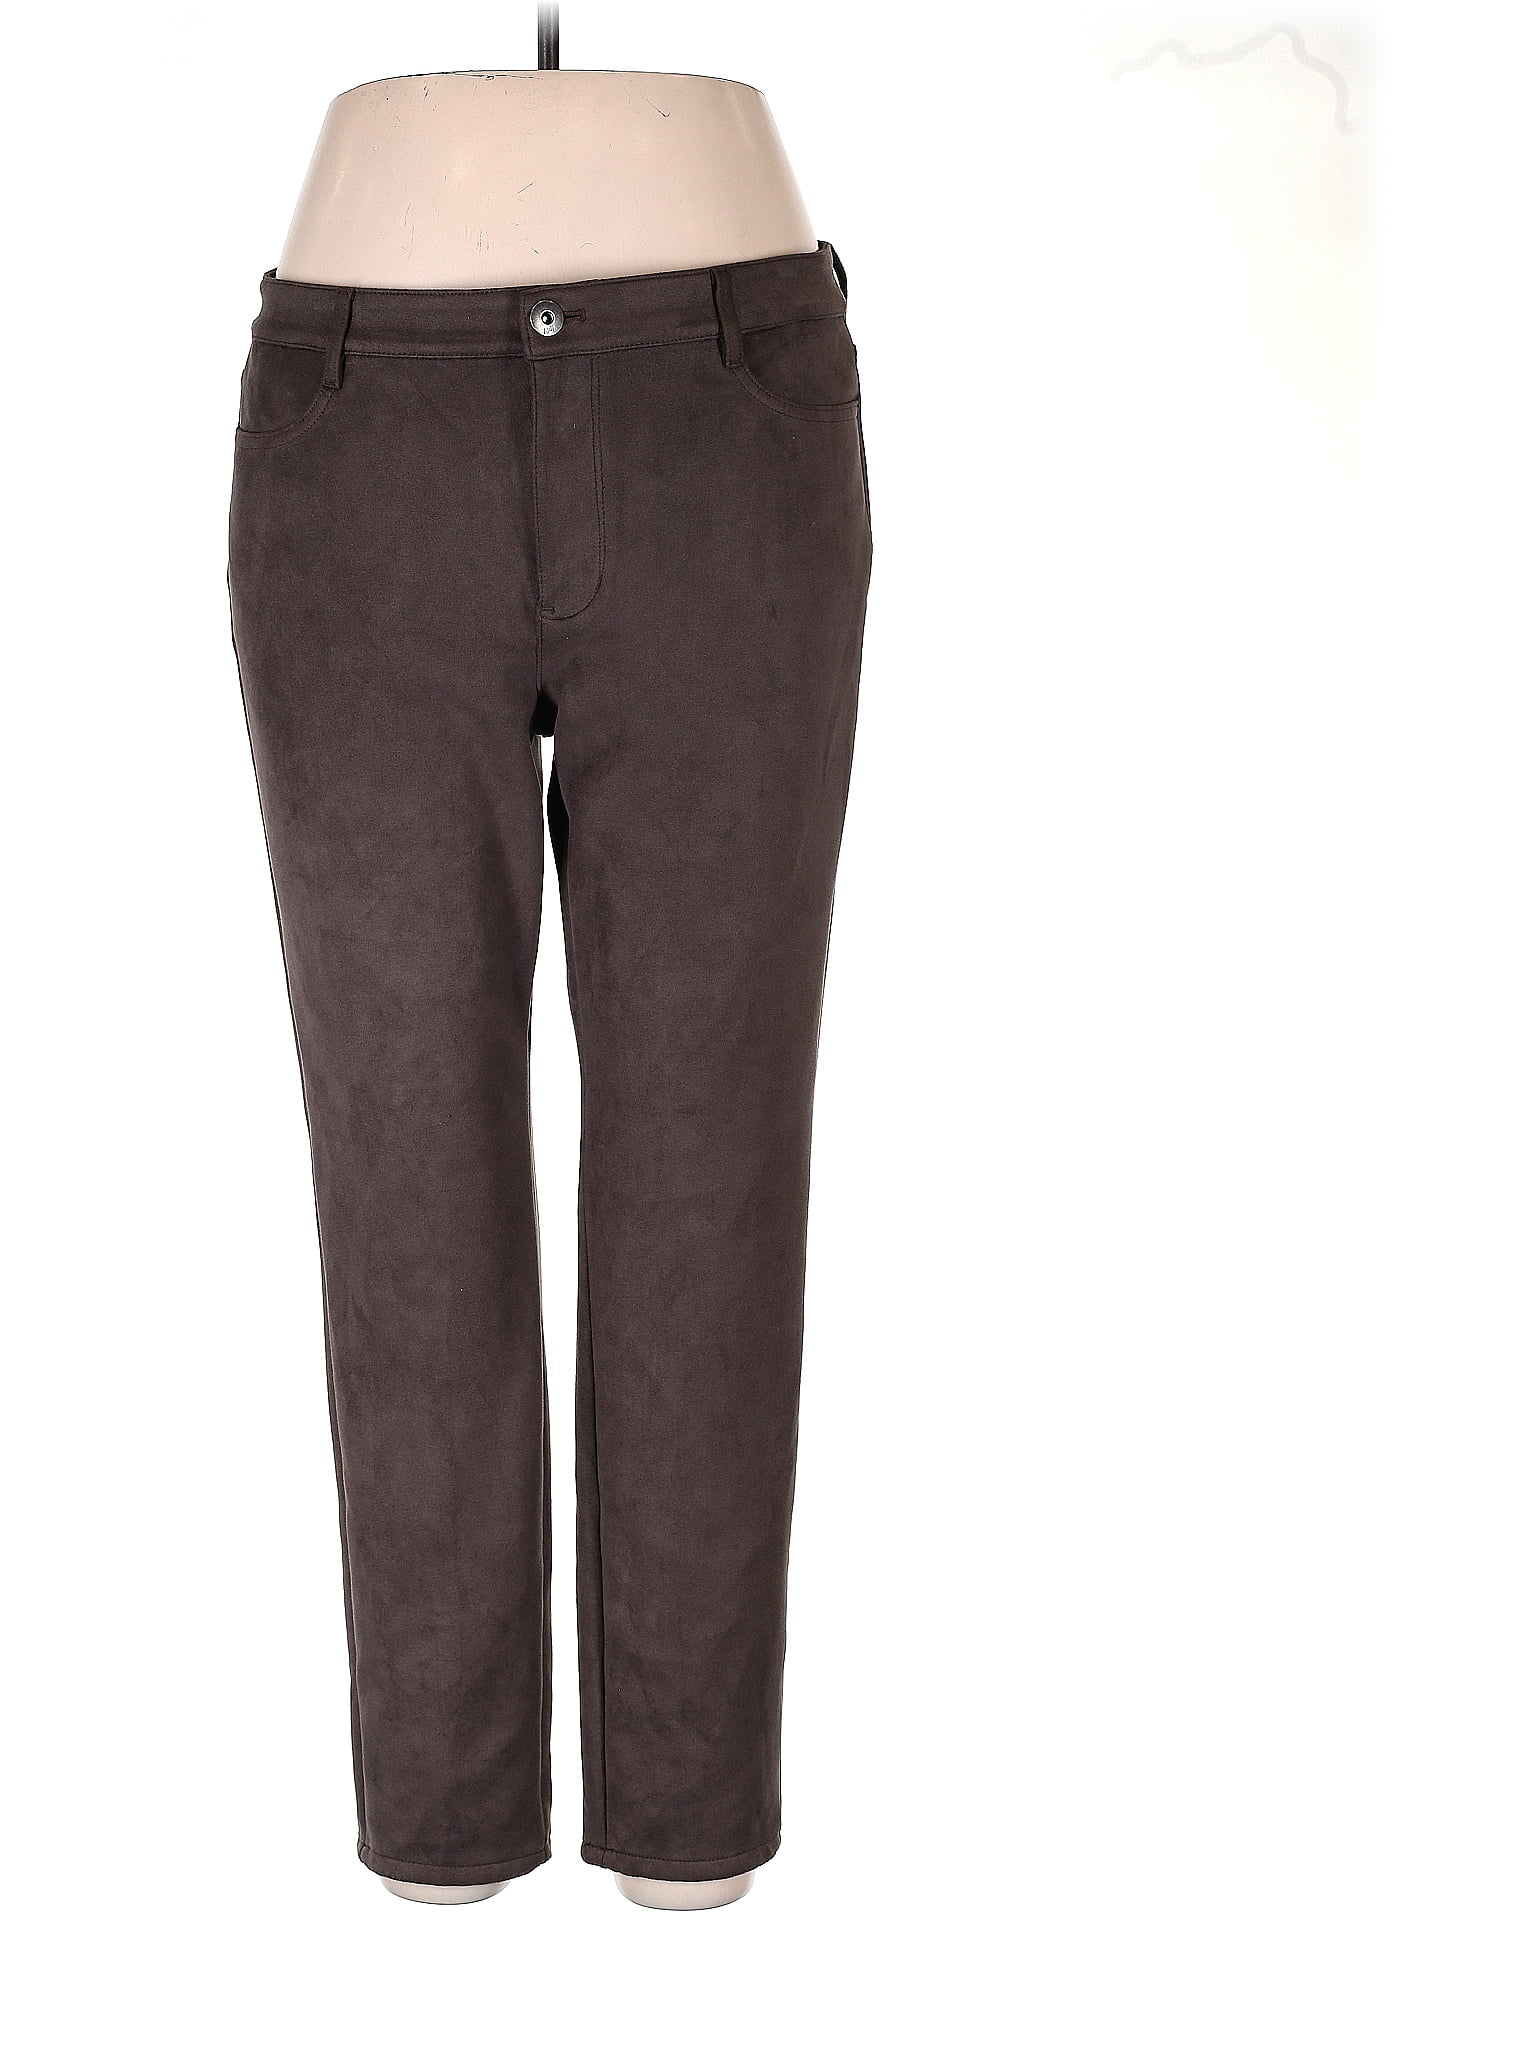 J.Jill Solid Brown Casual Pants Size 14 - 67% off